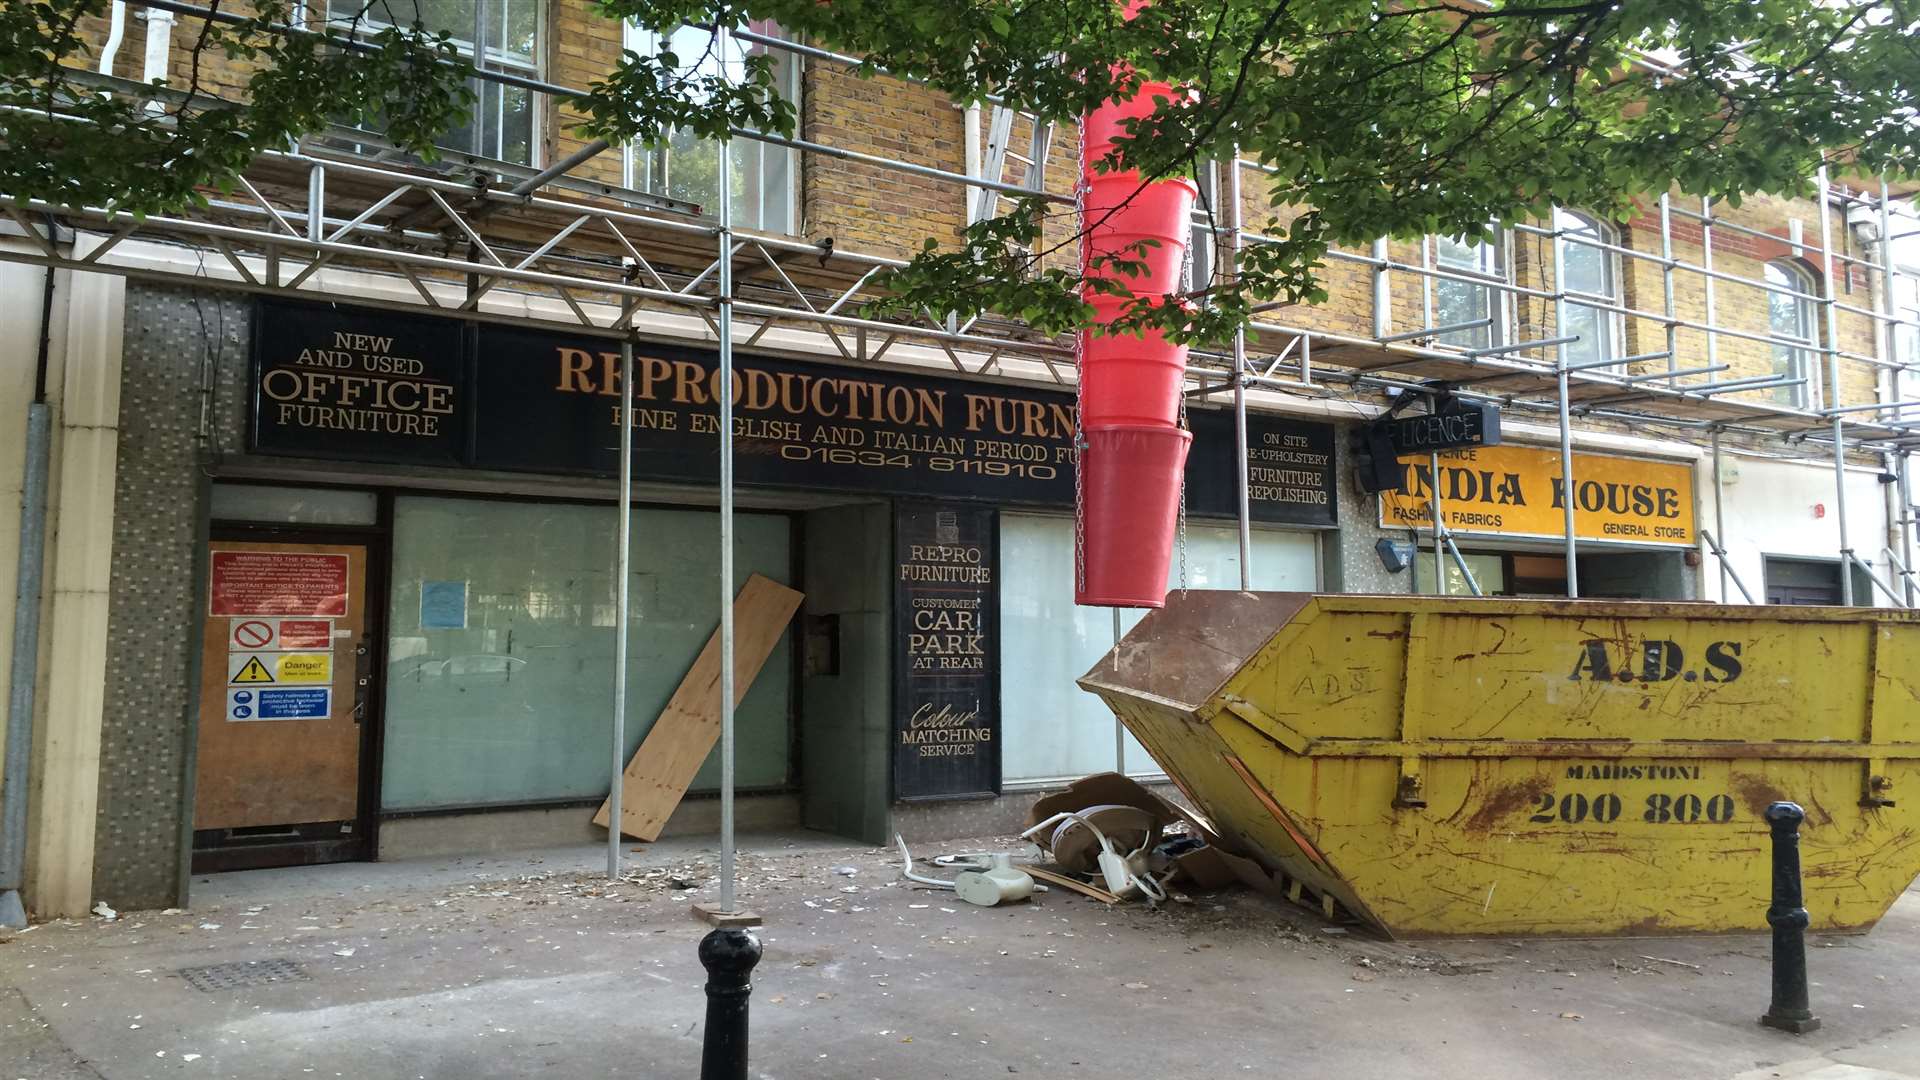 Owners have plans to open a restaurant bar at 17 New Road, Chatham - which was formerly a furniture shop